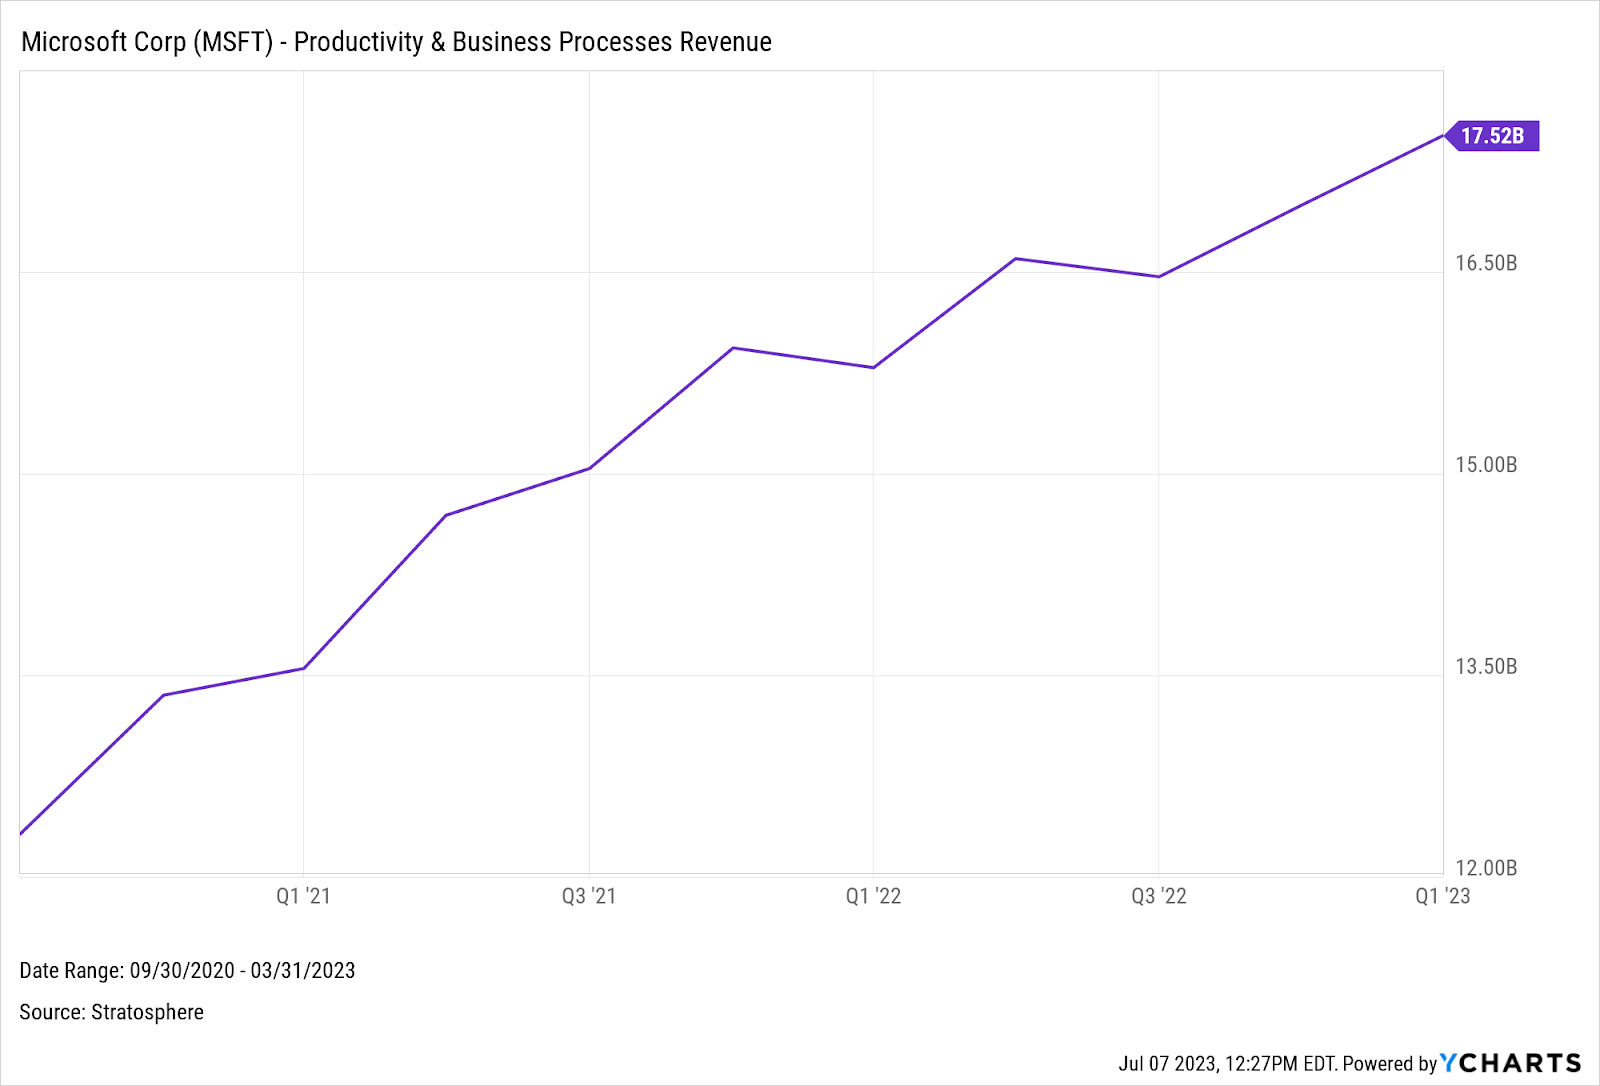 A chart of Microsoft's Productivity and Business Process revenue from Q3 2020 to Q1 2023.